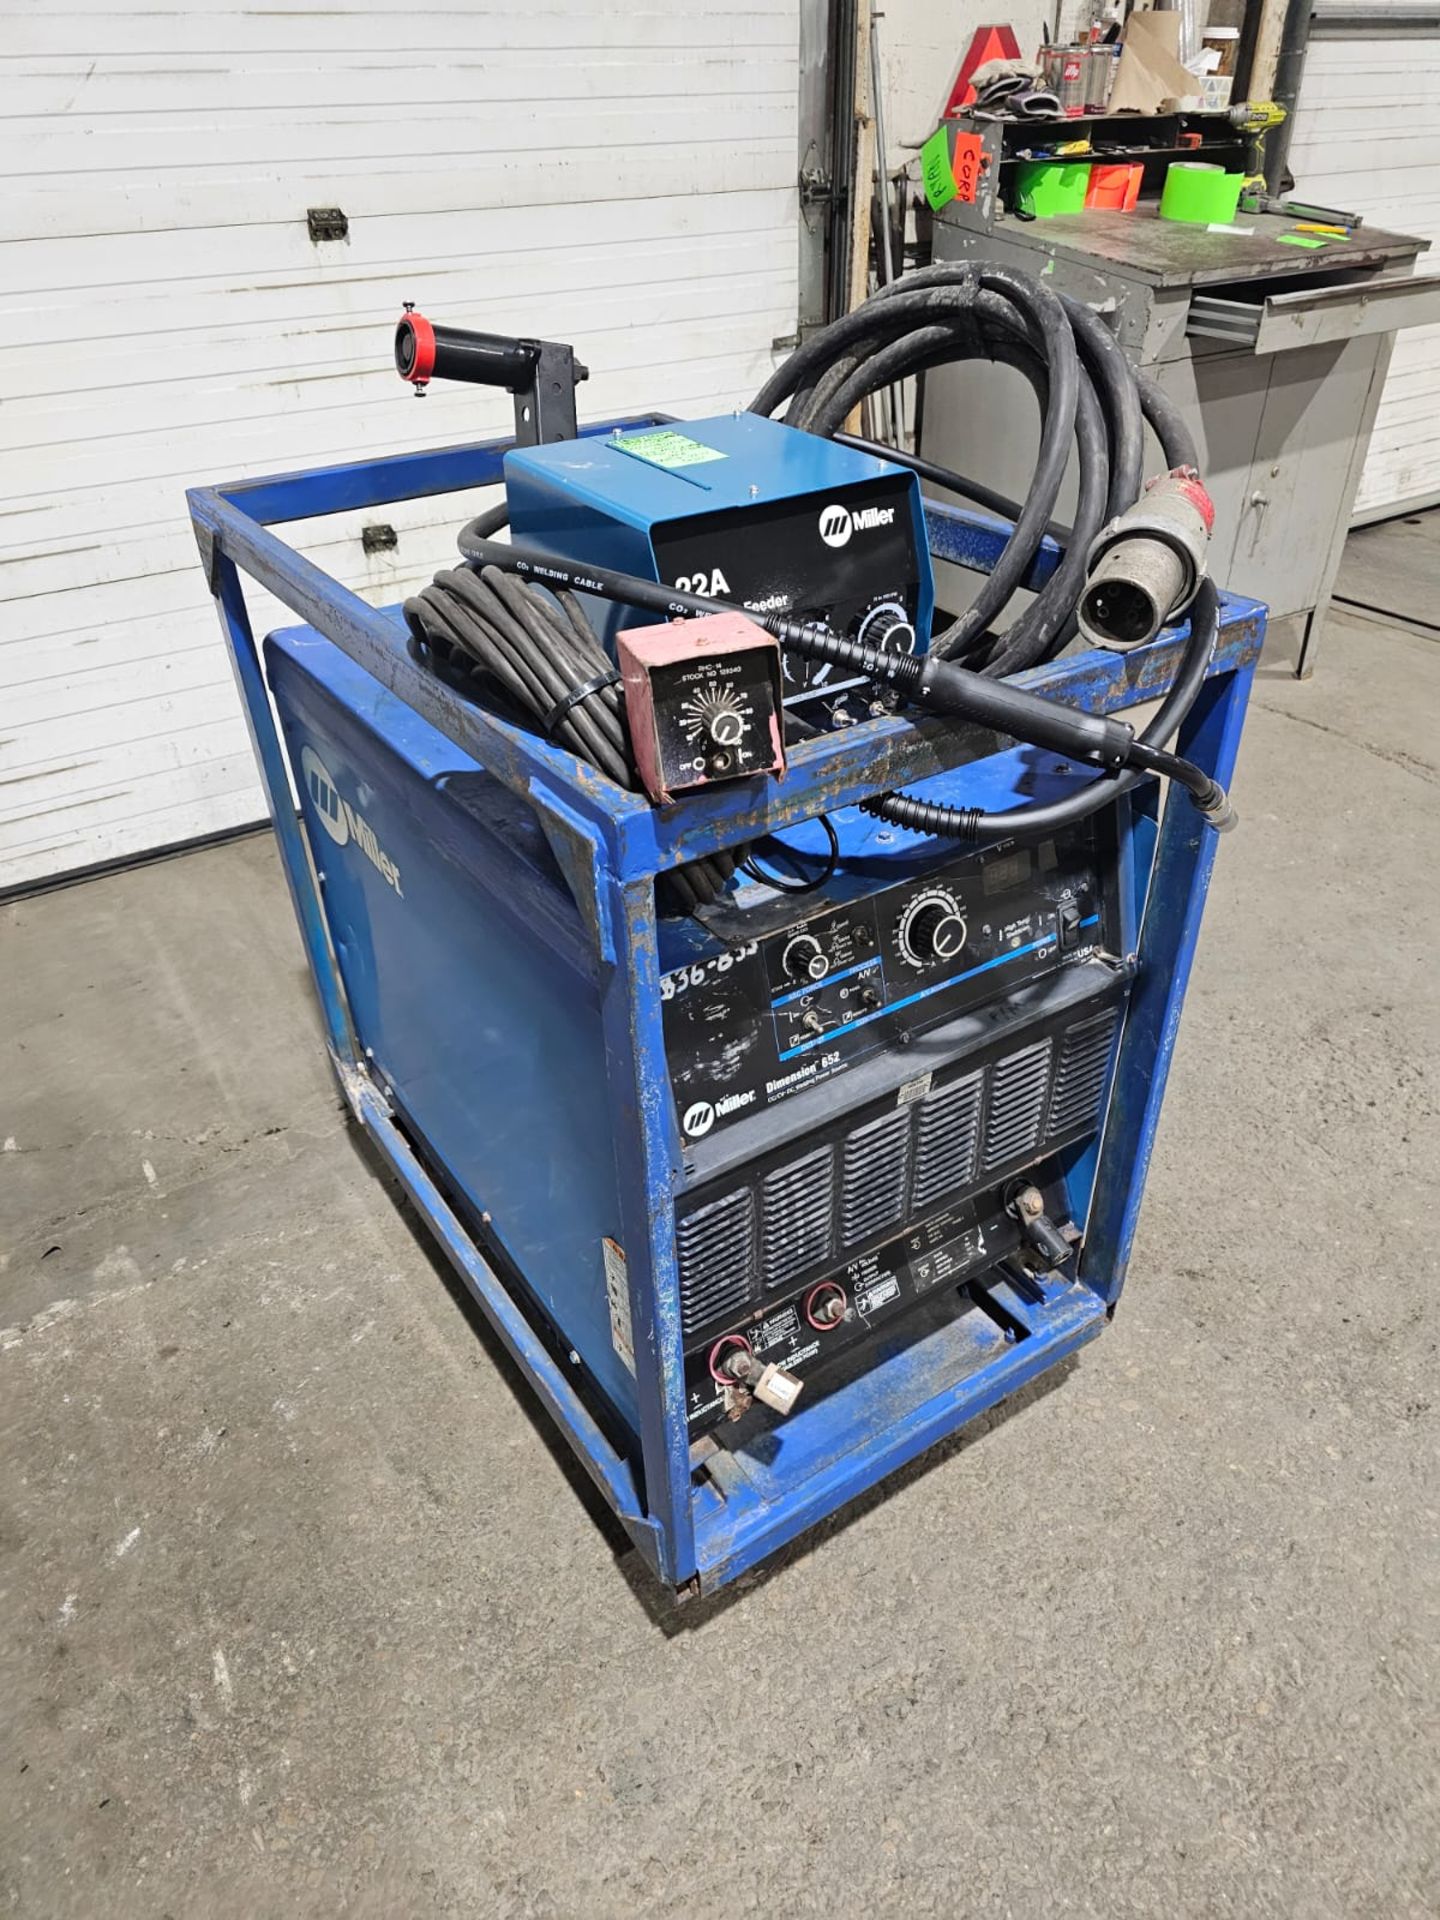 Miller Dimension 652 Mig Welder 650 Amp Mig Tig Stick Multi Process Power Source with 22A Wire - Image 4 of 6